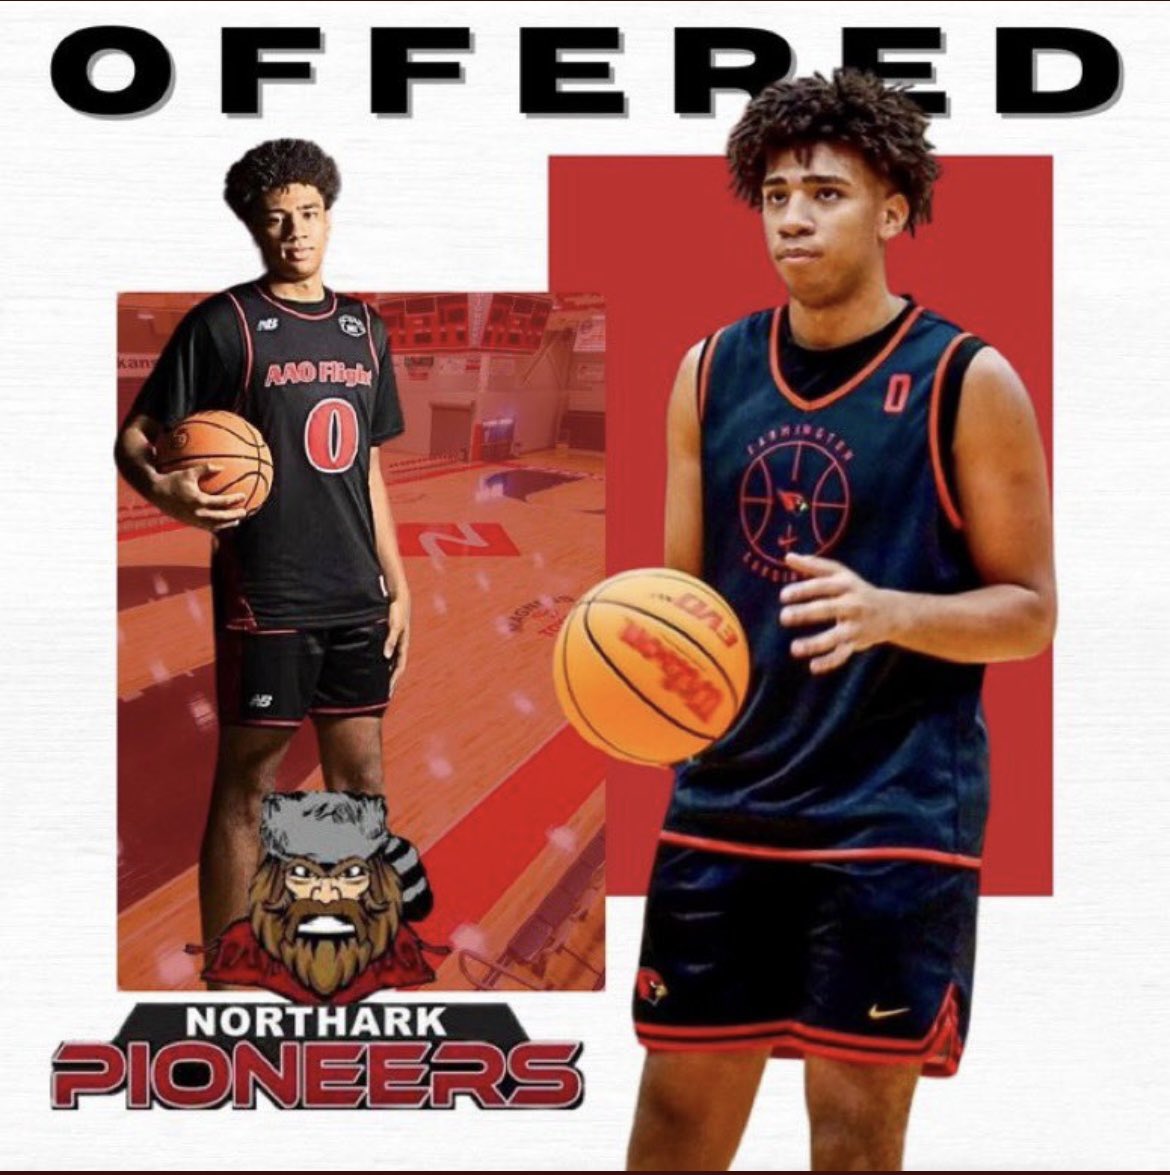 Blessed to receive an offer to continue my education and athletic career at NorthArk!